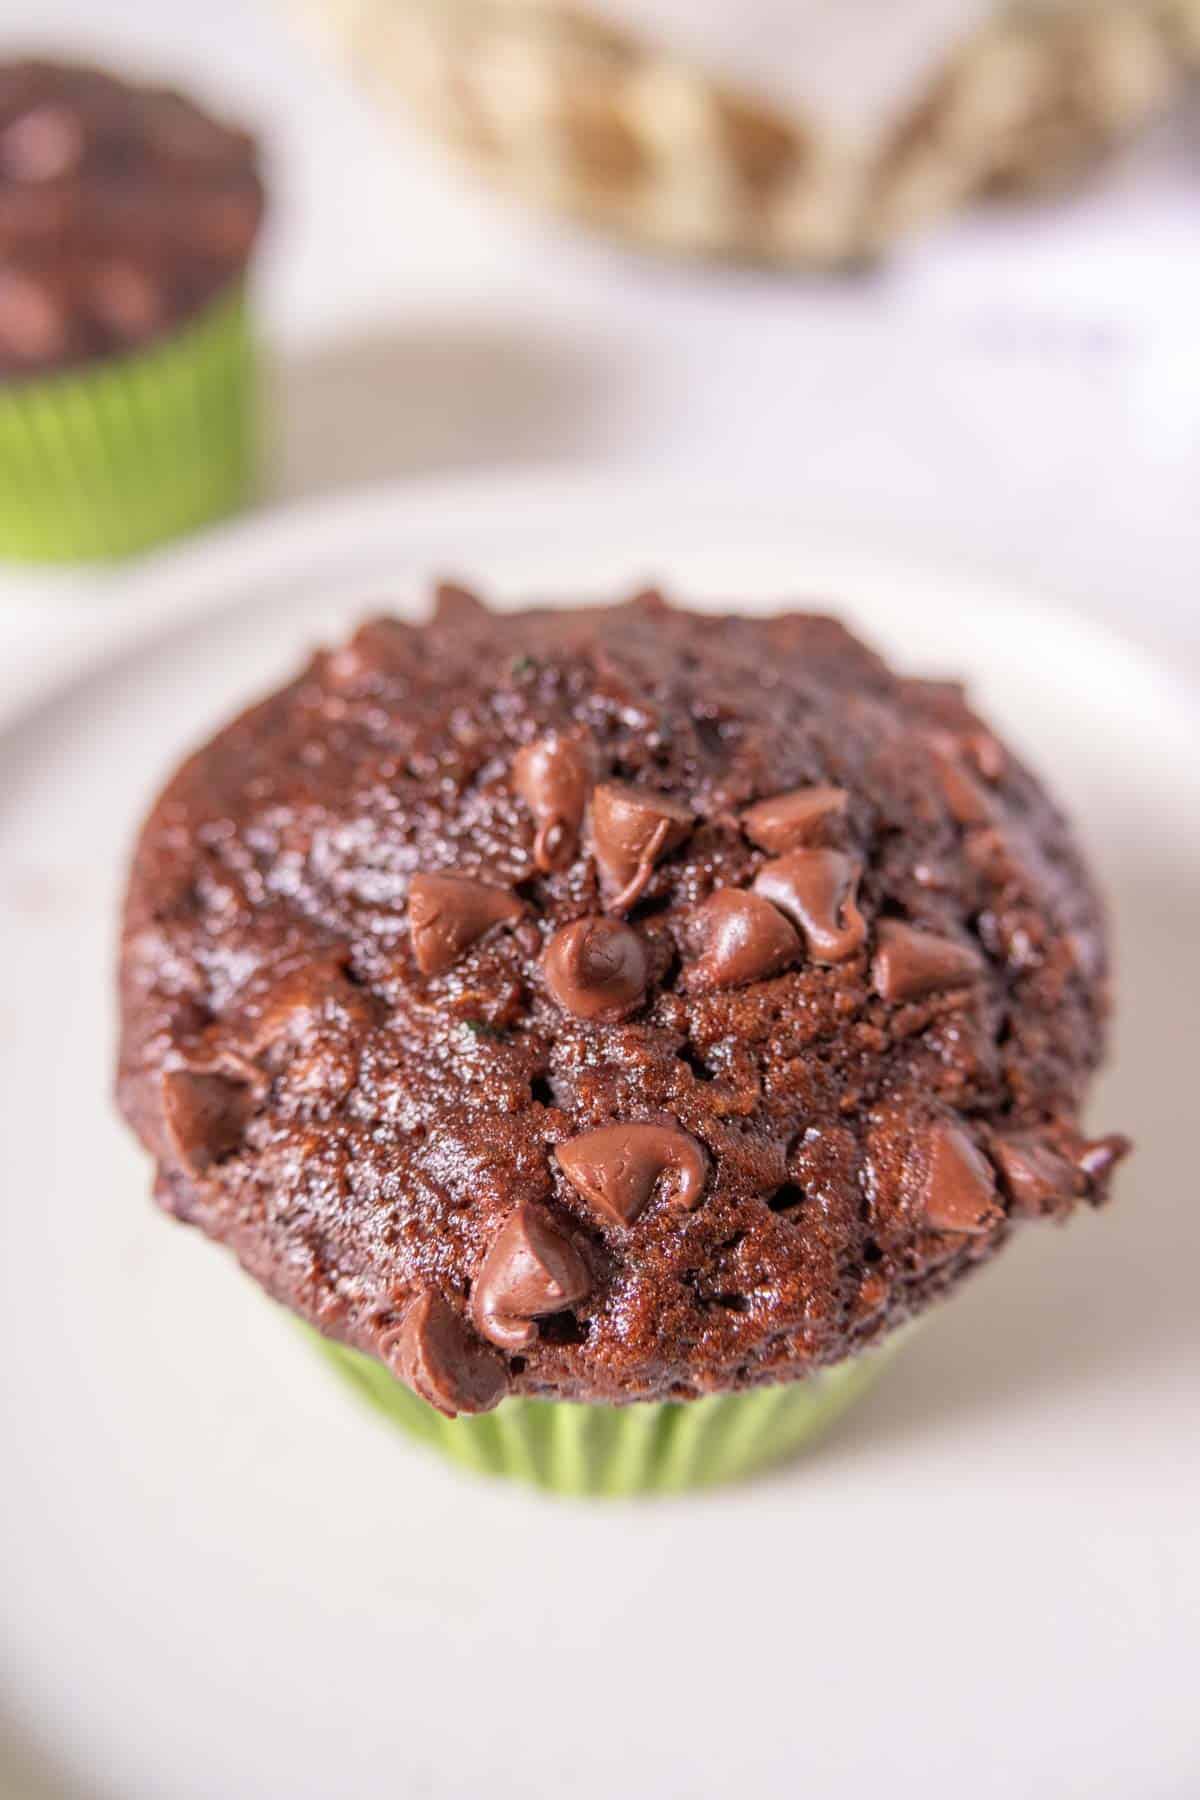 Close up of chocolate zucchini muffin showing chocolate chips on top.